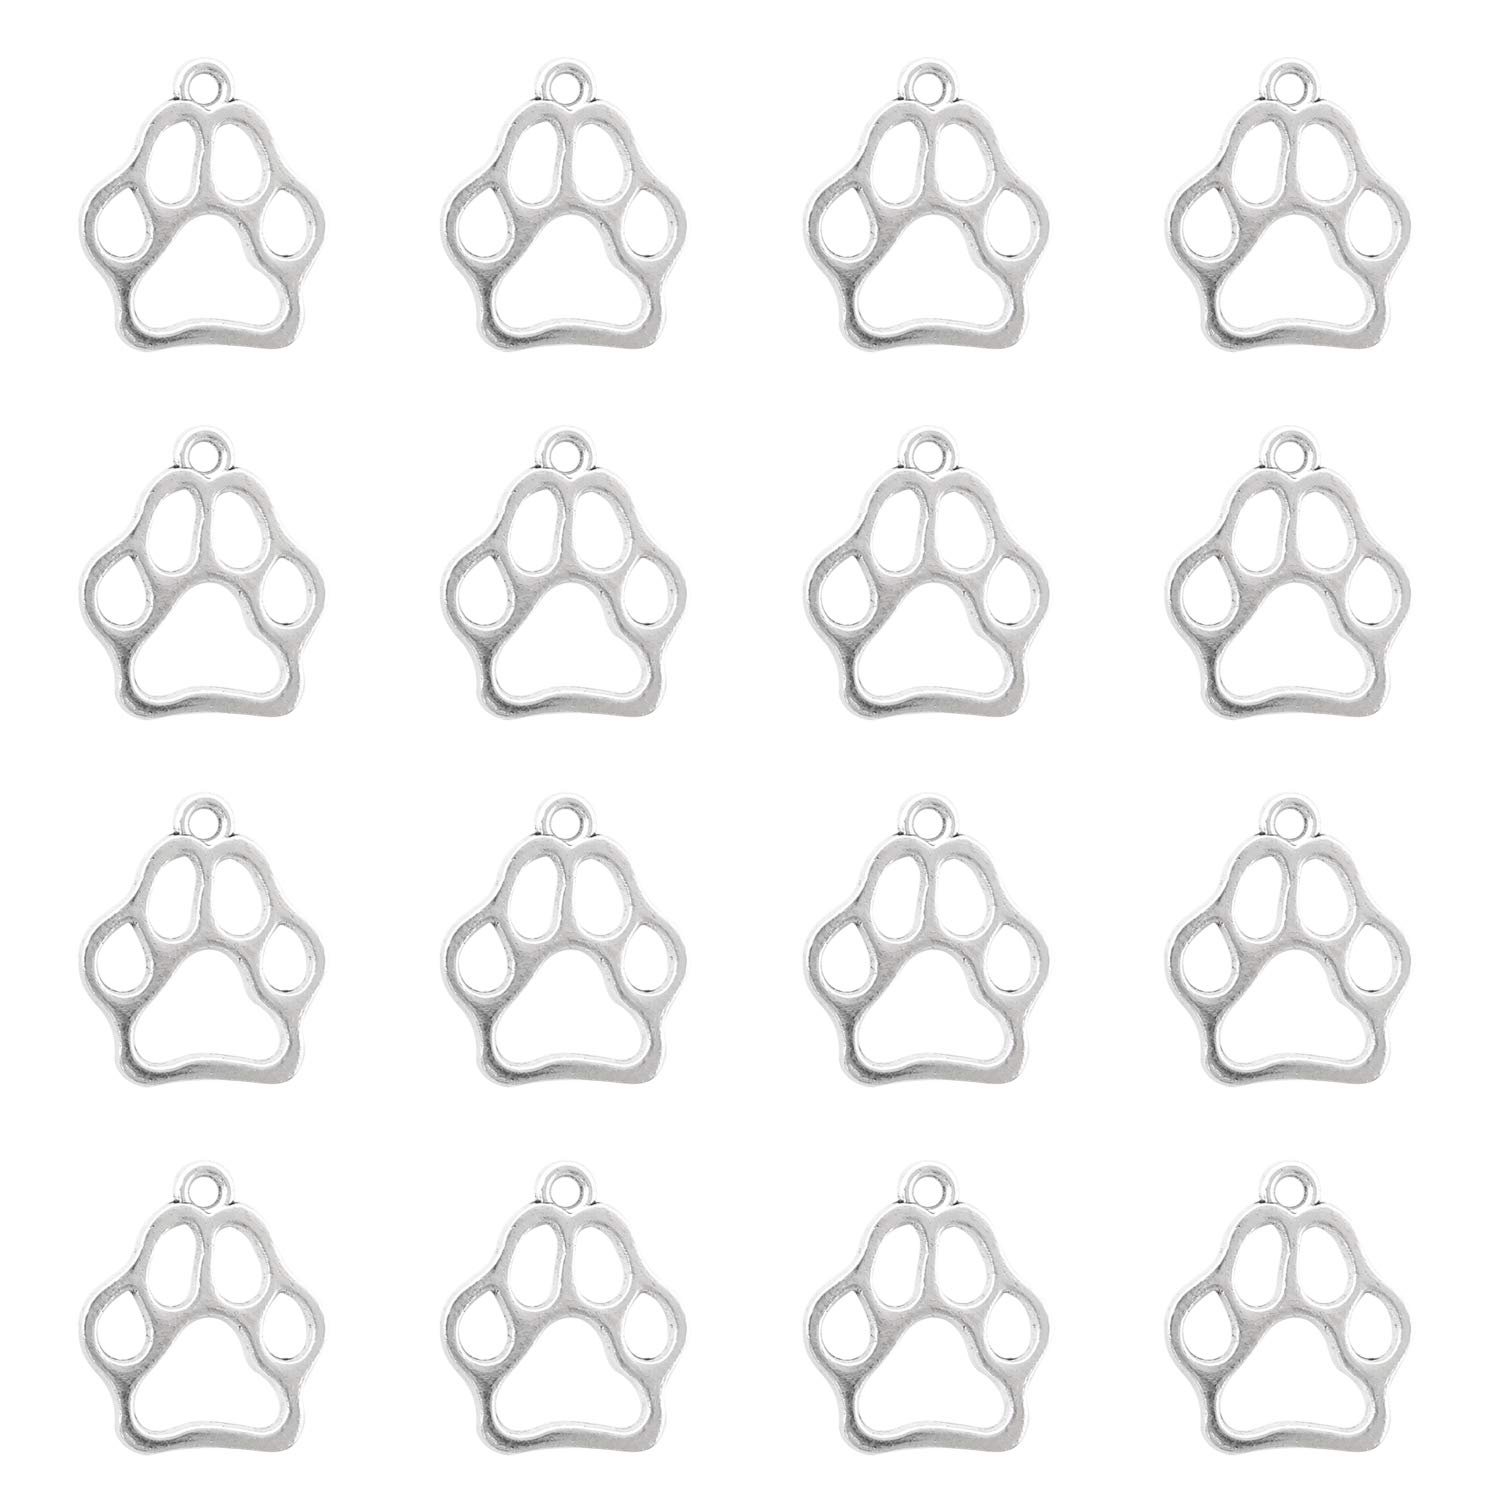 100Pcs Antique Silver Alloy Dog Paw Charms Pendant Diy Craft Jewelry Making Accessory